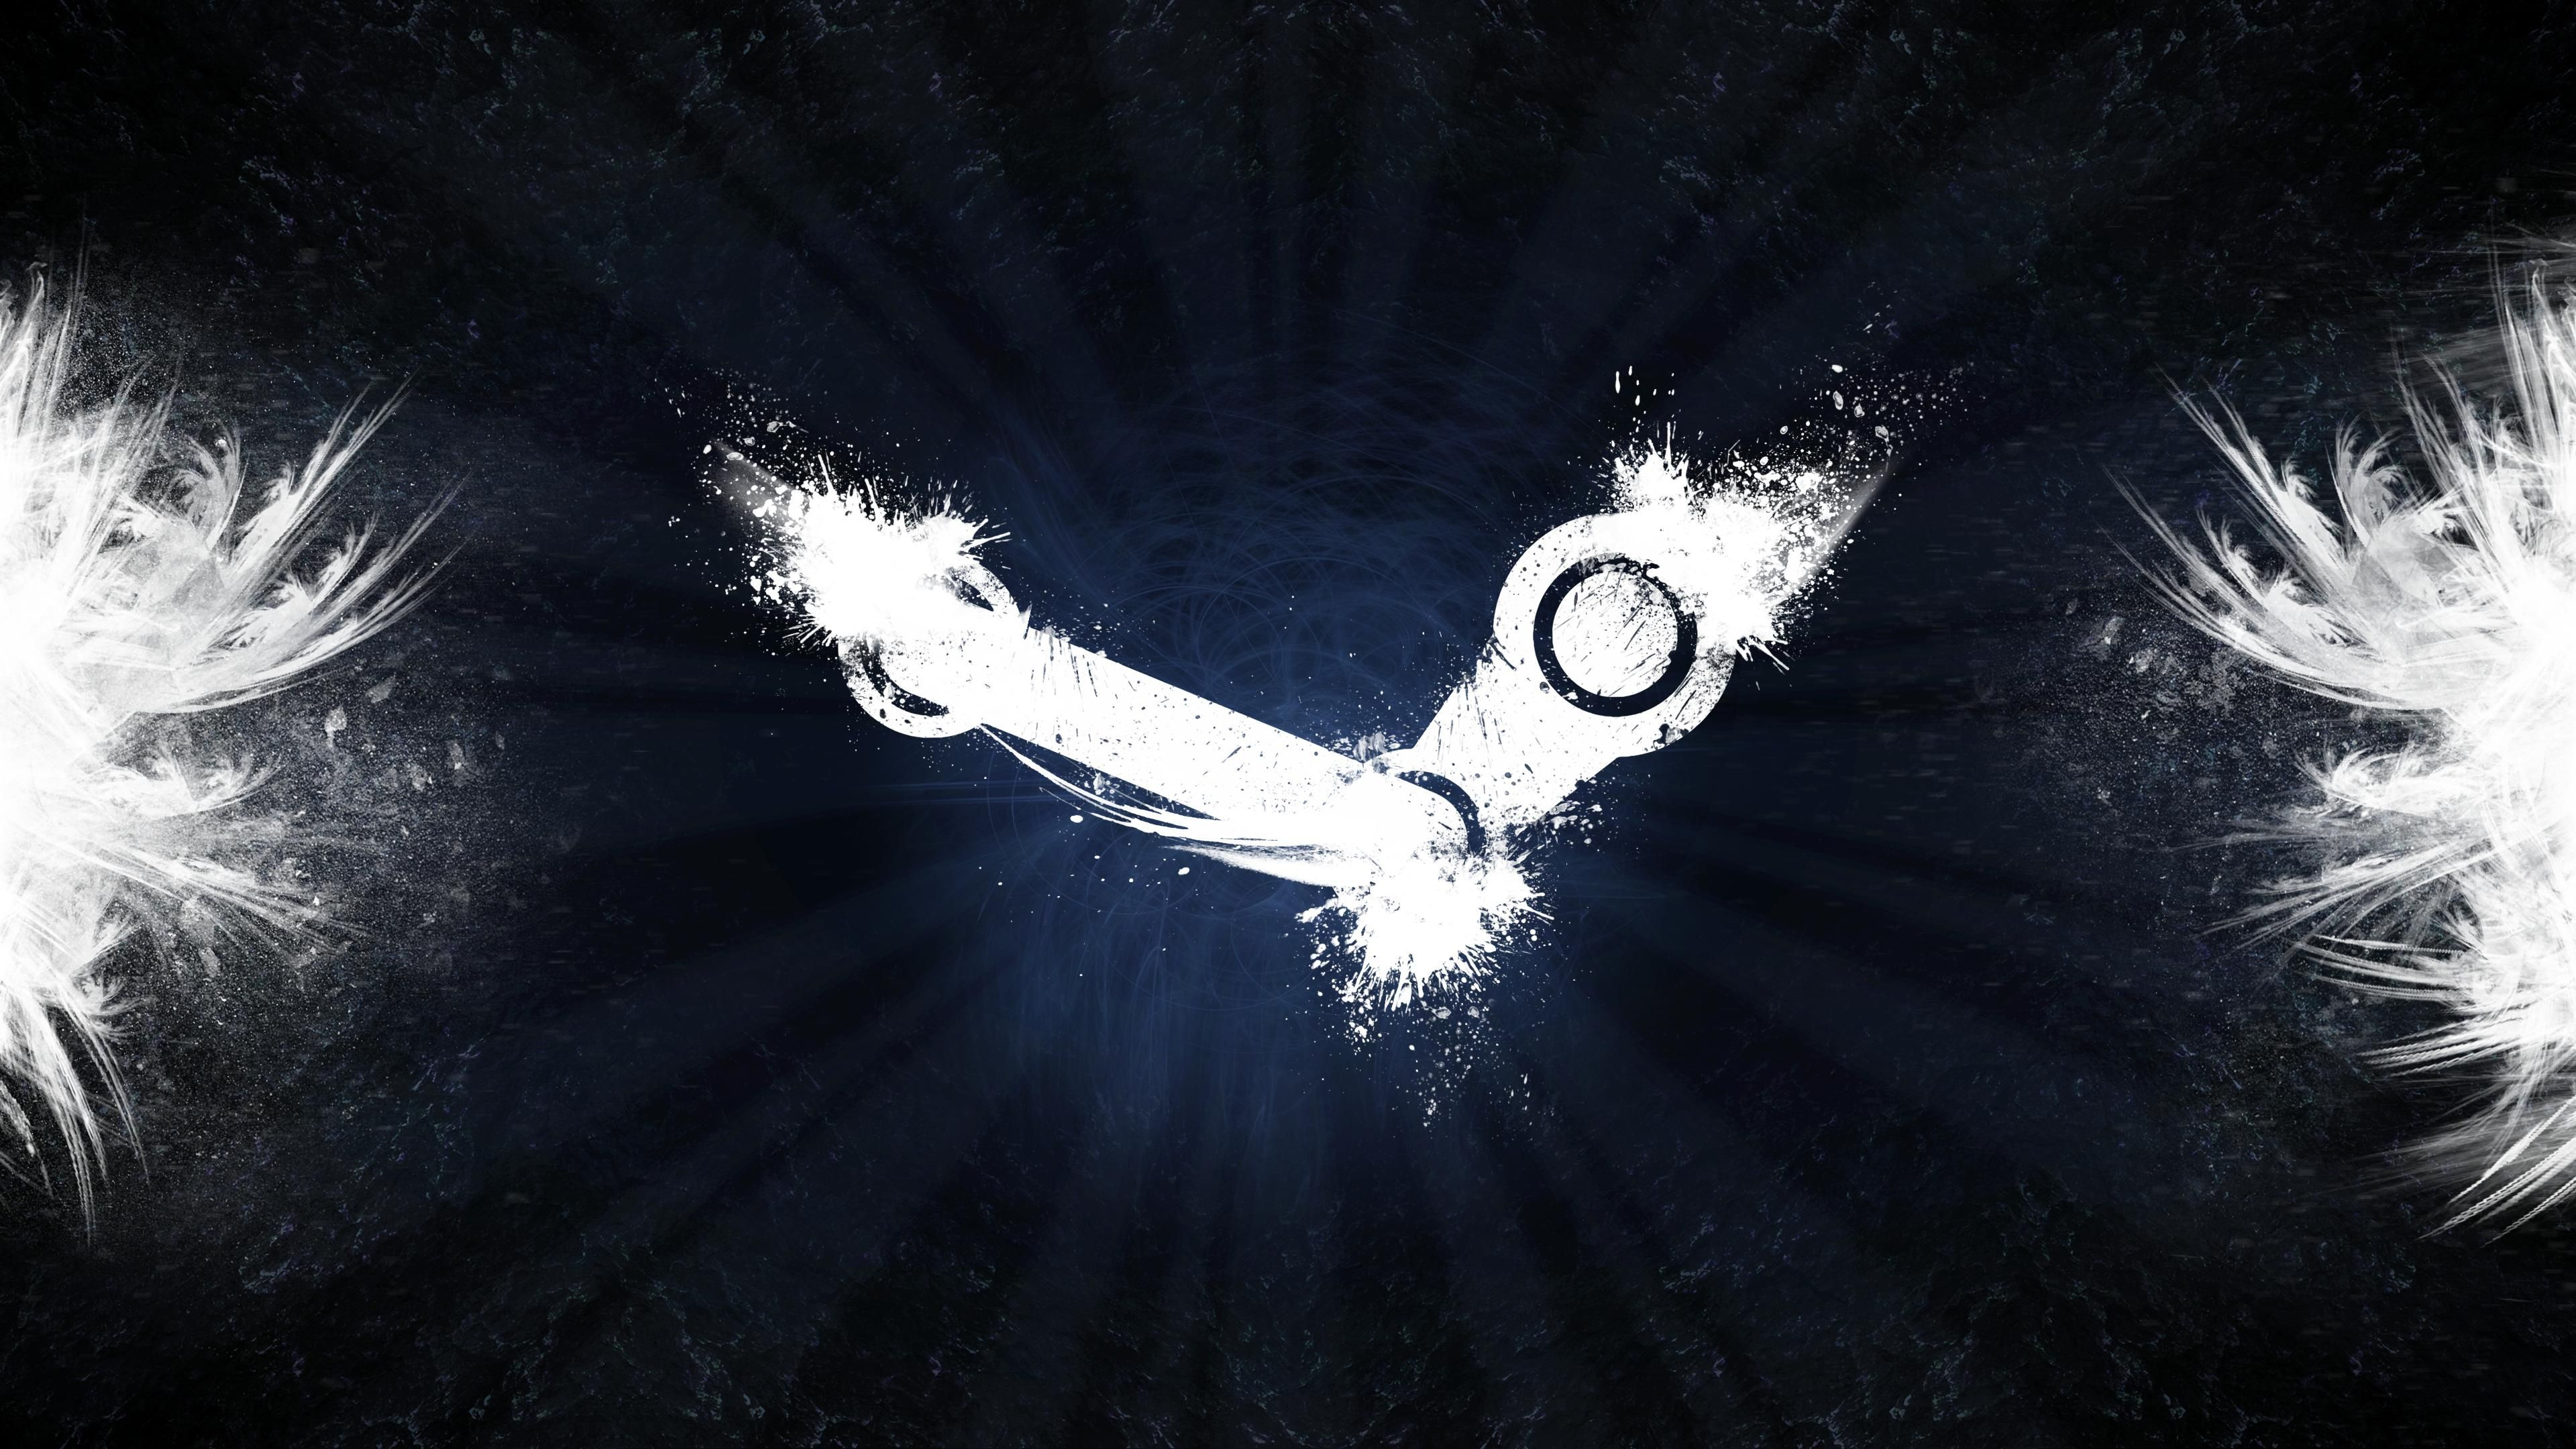 3840x2160 4K] Steam Wallpaper (more in comments) &acirc;&#128;&cent; /r/wallpapers | Hd wallpapers for laptop, Wallpaper, Gaming wallpapers